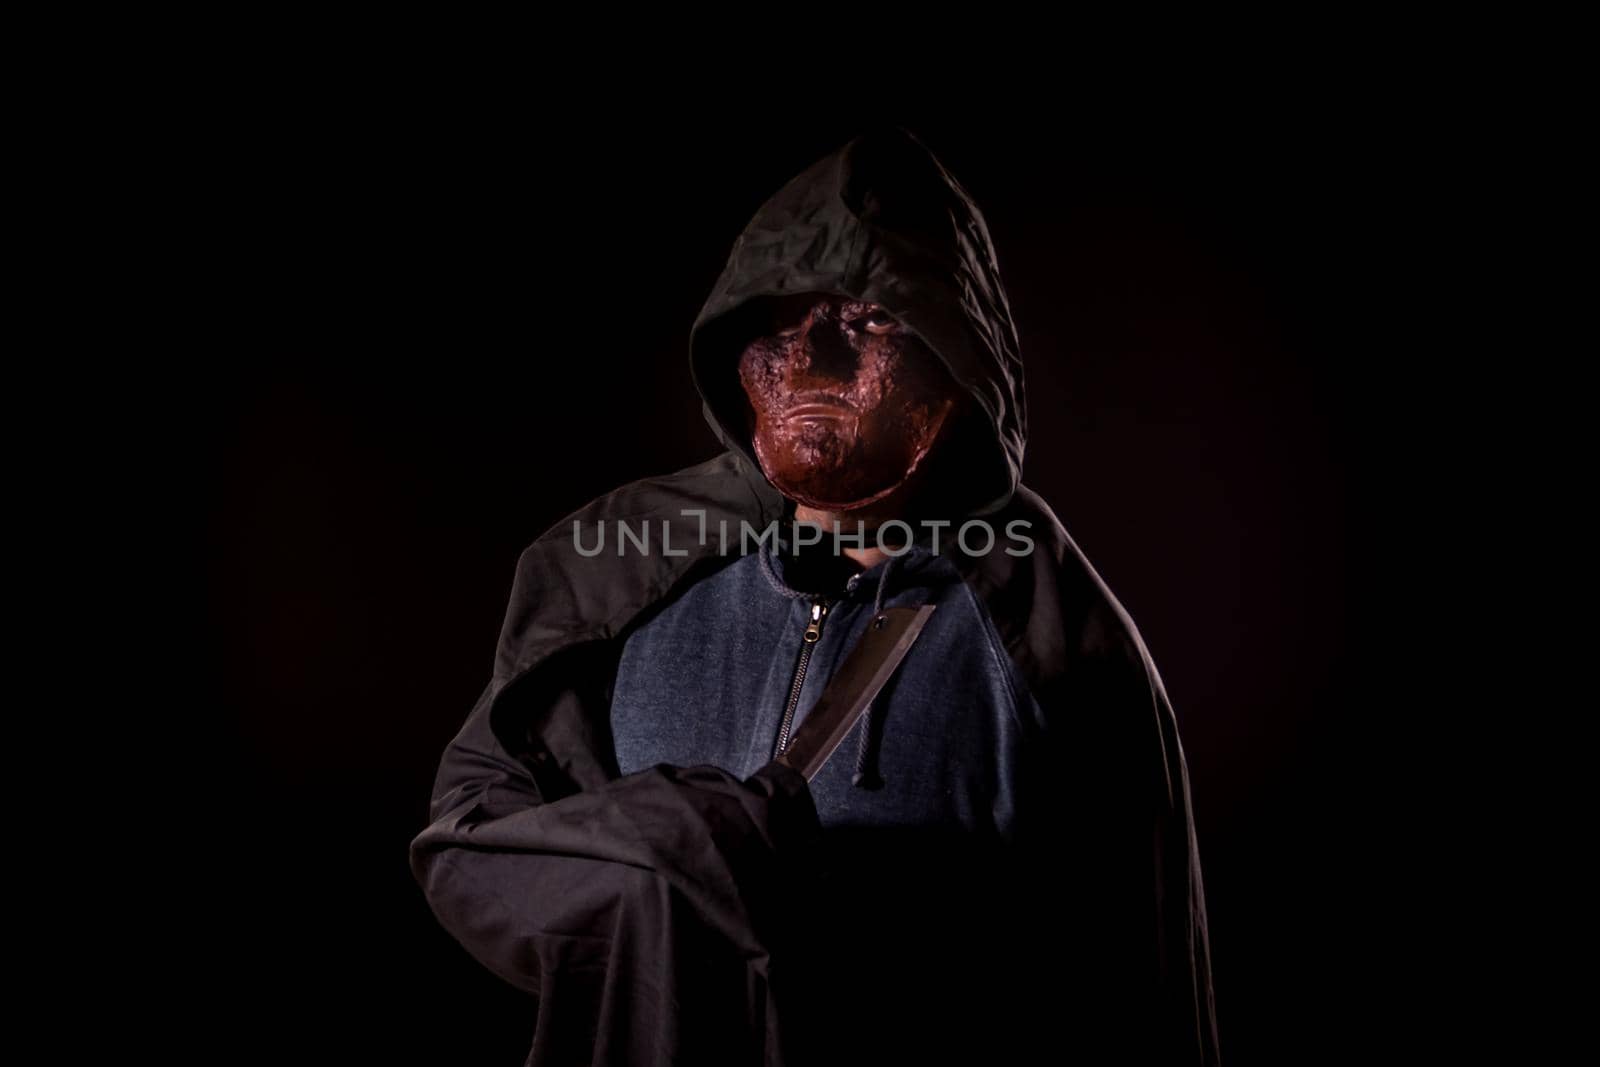 Scary killer in mask holding knife by imagesbykenny